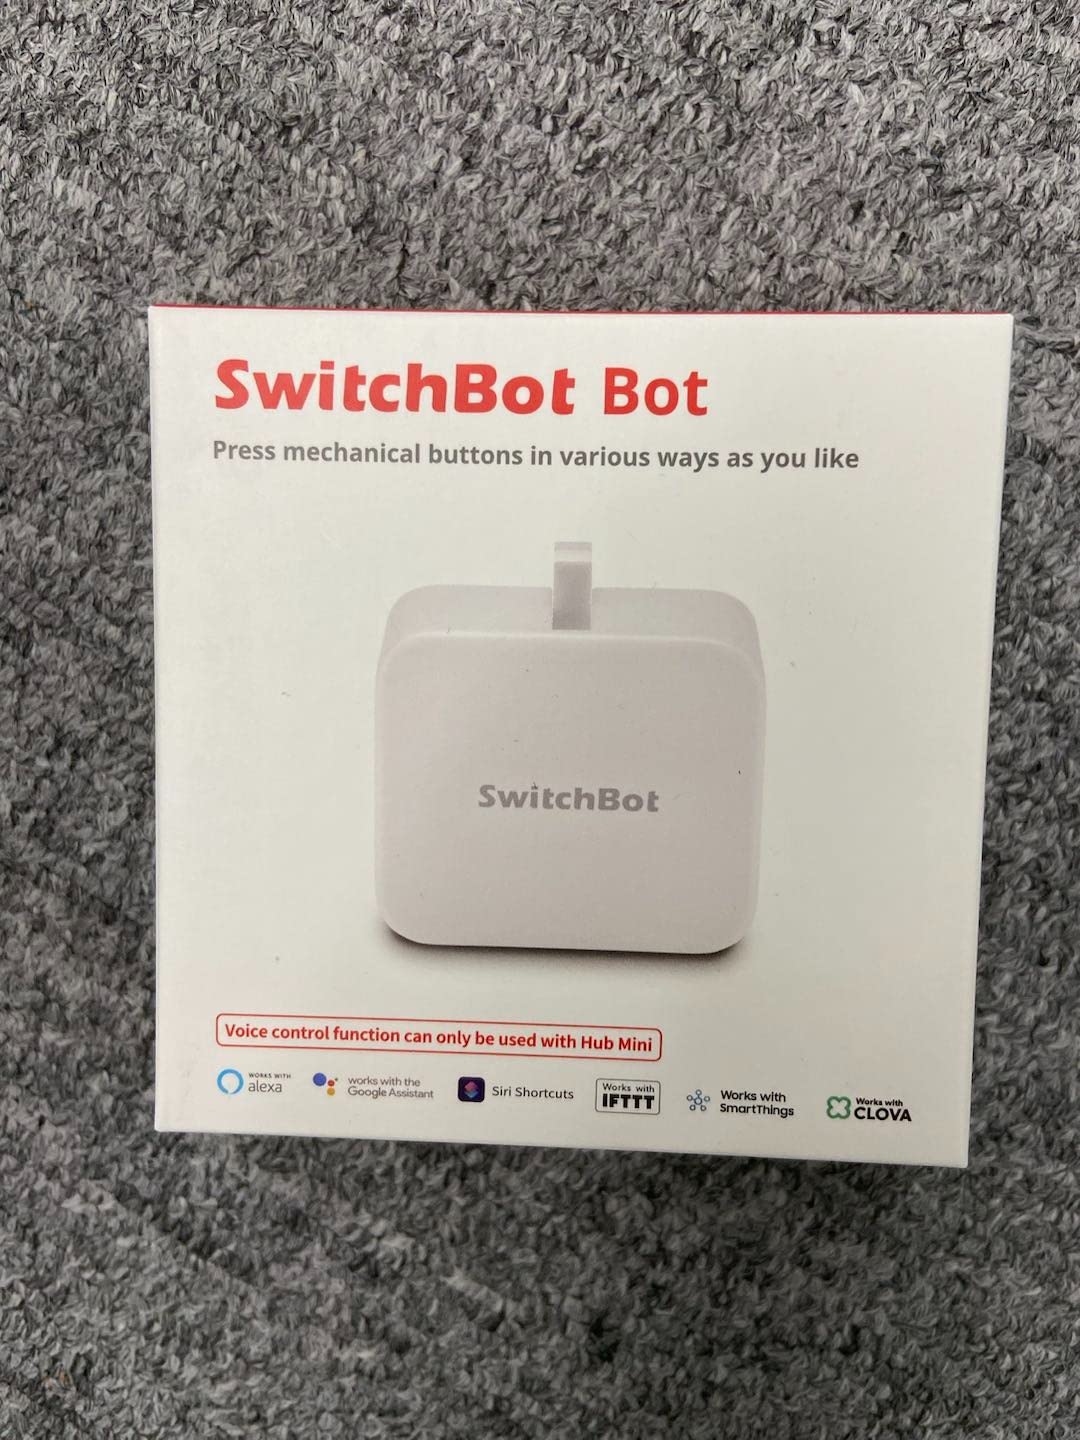 SwitchBot Smart Switch Button Pusher - Fingerbot for Automatic Light Switch, Timer and APP Bluetooth Remote Control, Works with Alexa, Google Home, HomeKit When Paired with SwitchBot Hub (White)